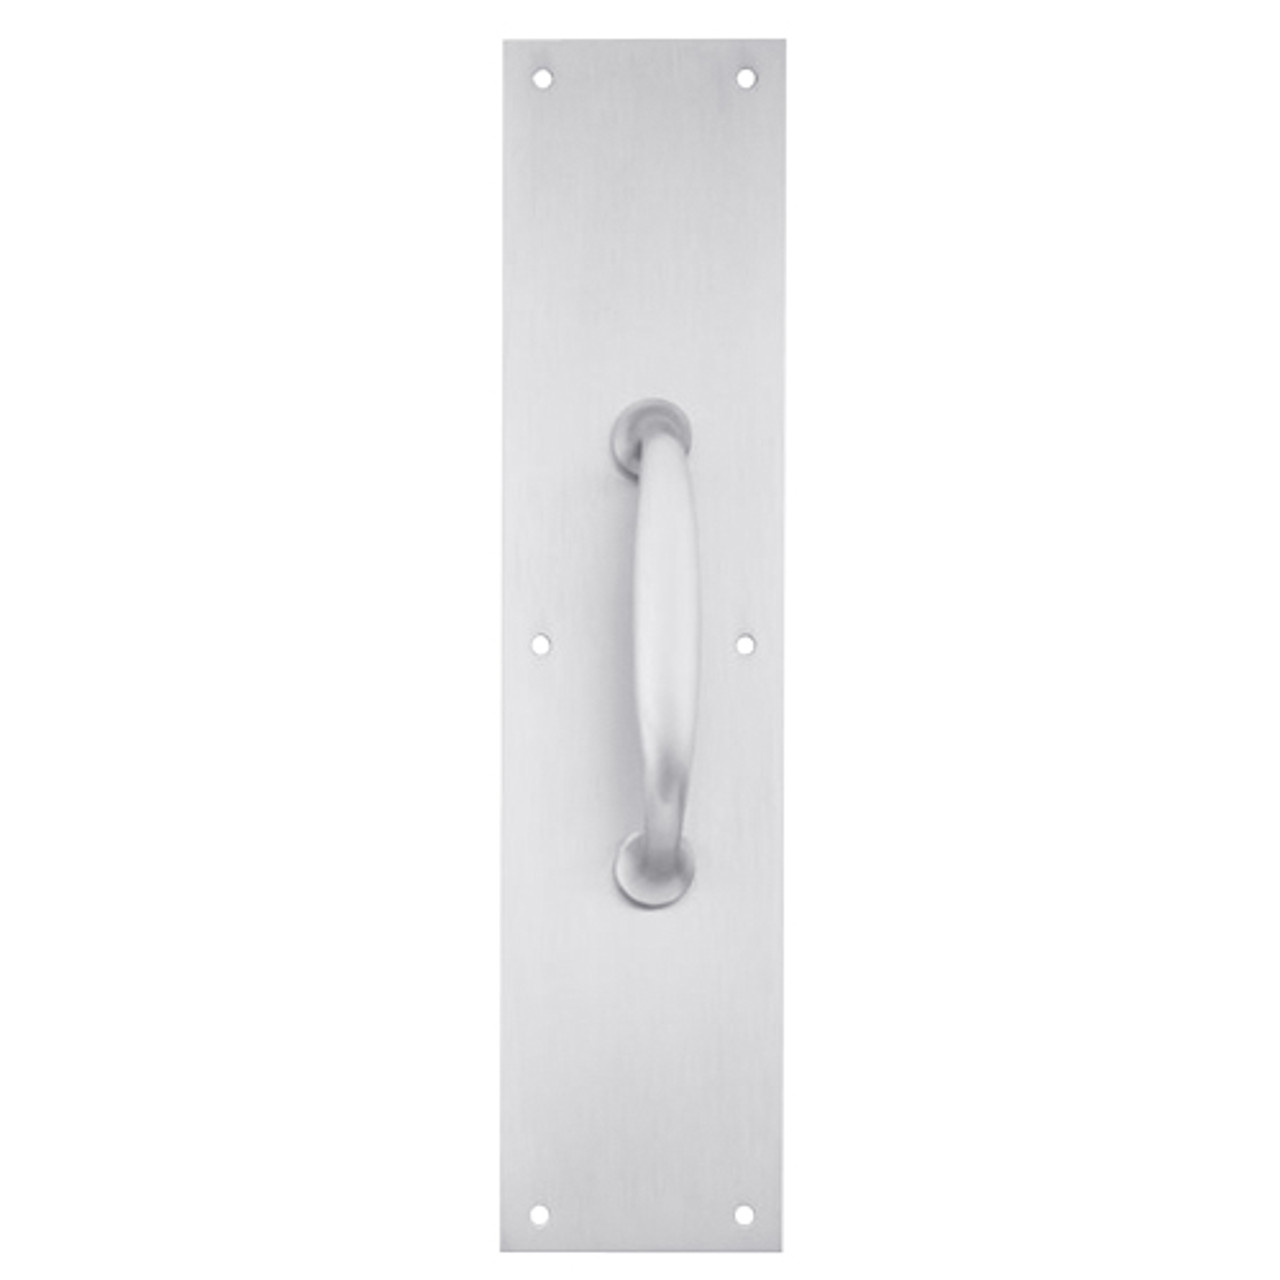 8311-5-US26-4x16 IVES Architectural Door Trim 4x16 Inch Pull Plate in Bright Chrome